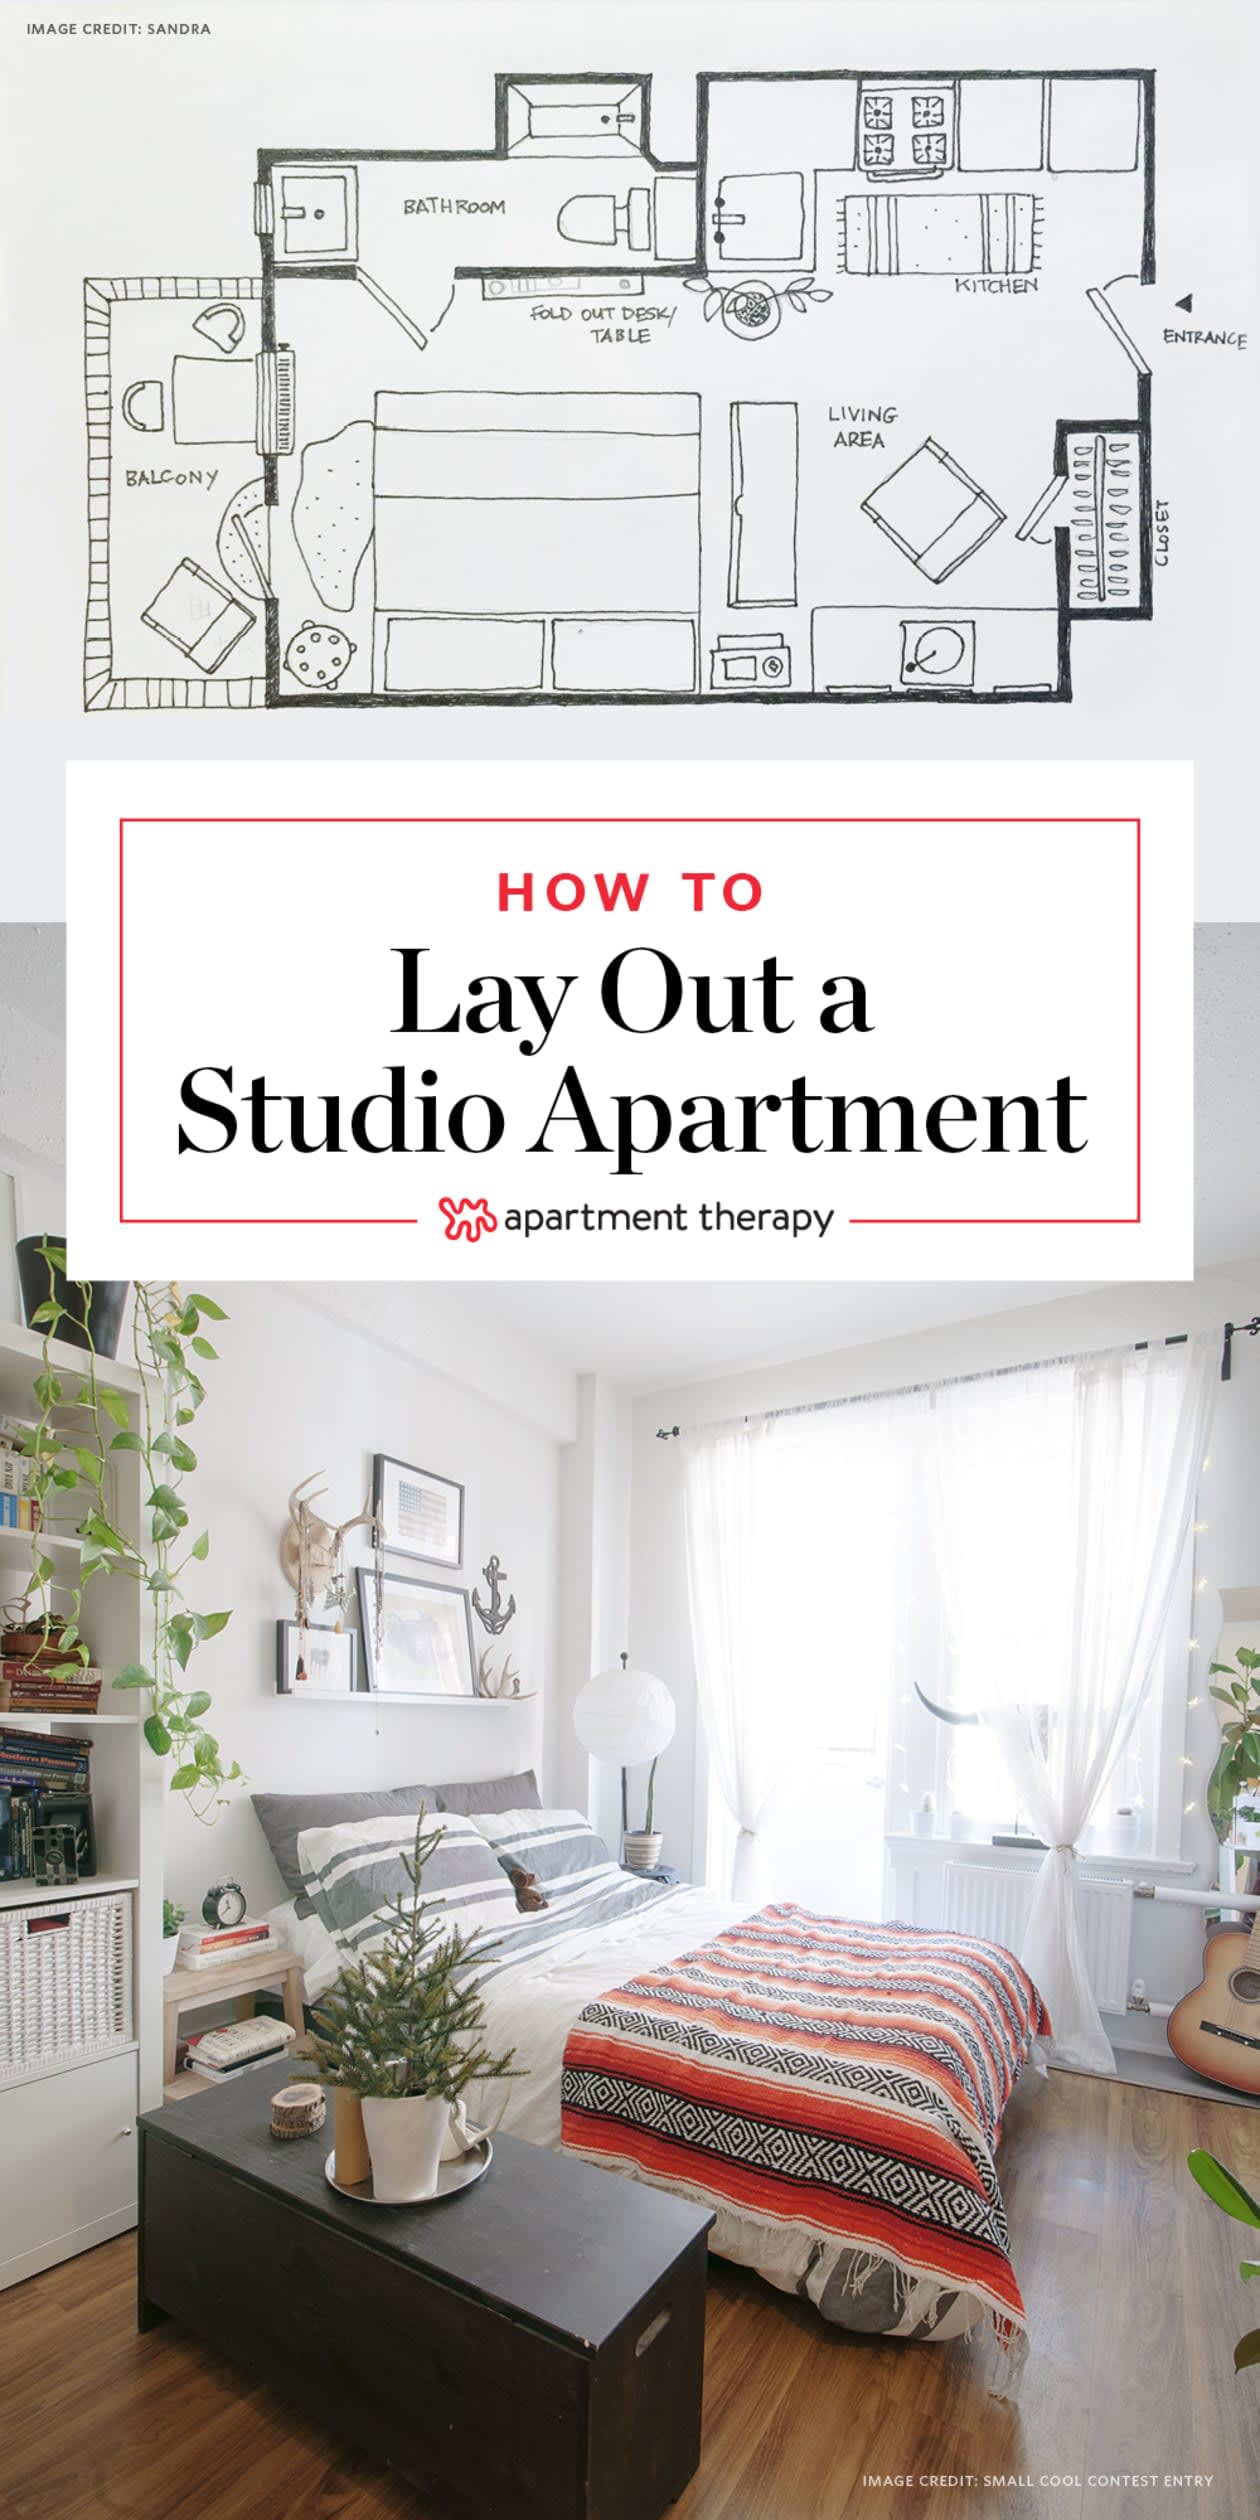 5 Ways To Lay Out A Studio Apartment Apartment Therapy,Black Mirrored Furniture Bedroom Ideas